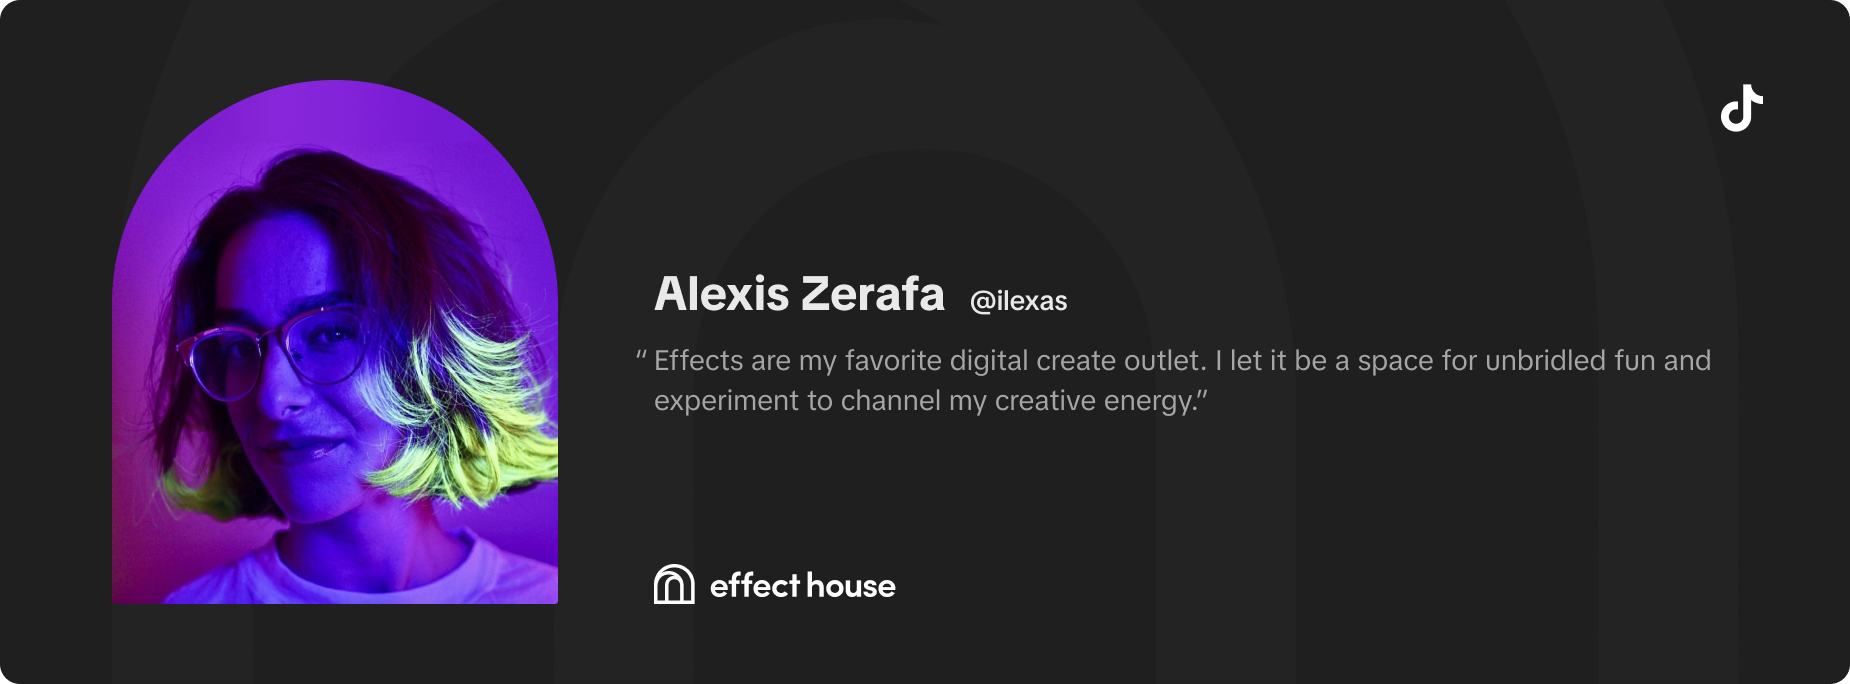 Effects are my favorite digital create outlet. I let it be a space for unbridled fun and experiment to channel my creative energy. -Alexis Zerafa (@ilexas)